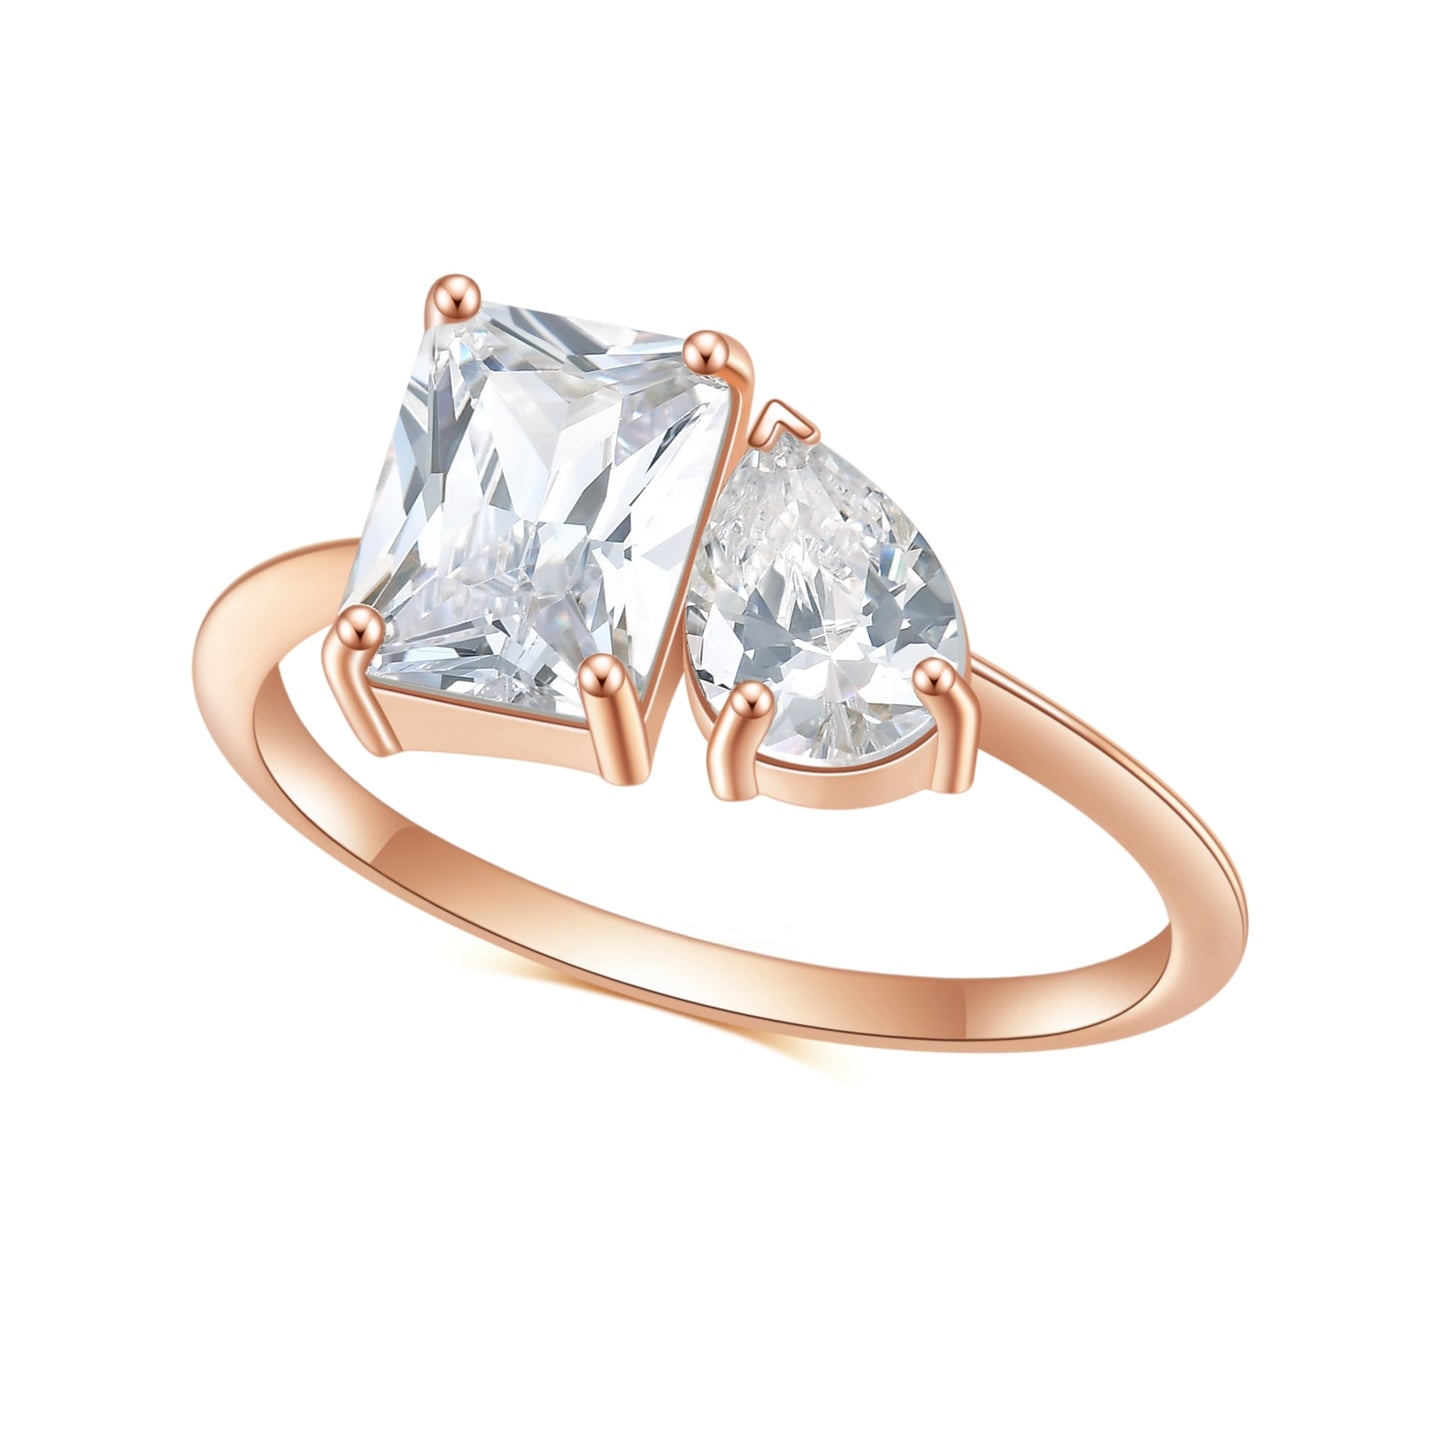 A rose gold Toi et Moi ring with a emerald cut moissanite and a tear drop moissanite.